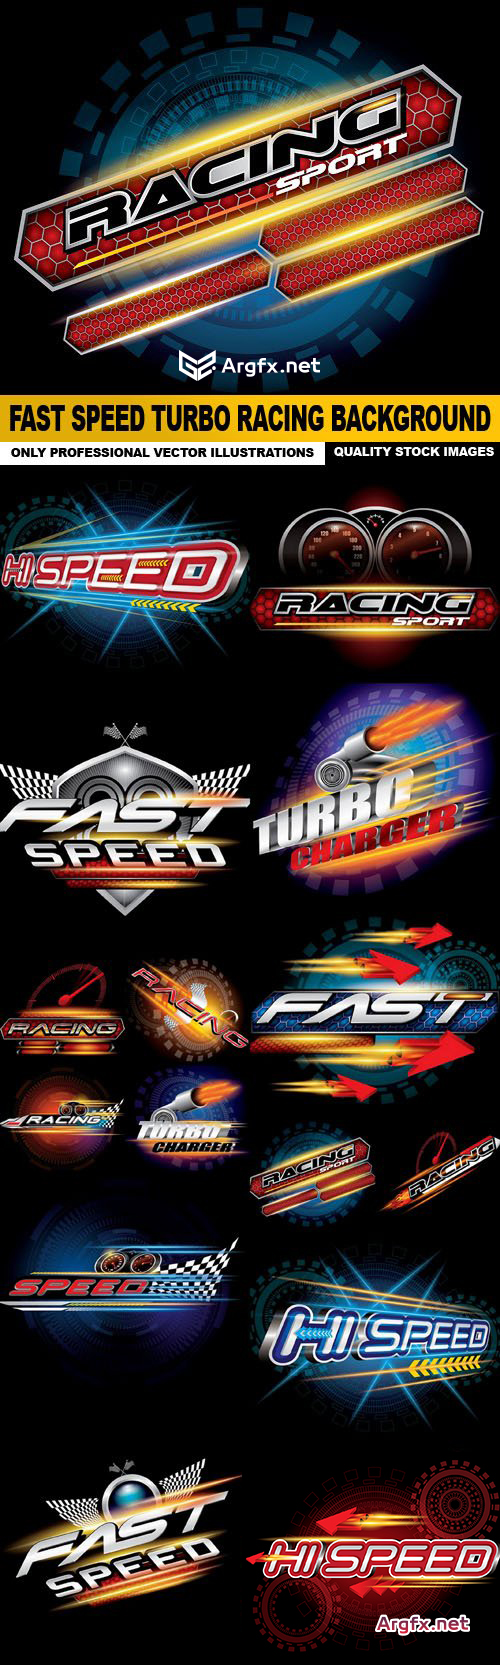 Fast Speed Turbo Racing Background - 15 Vector